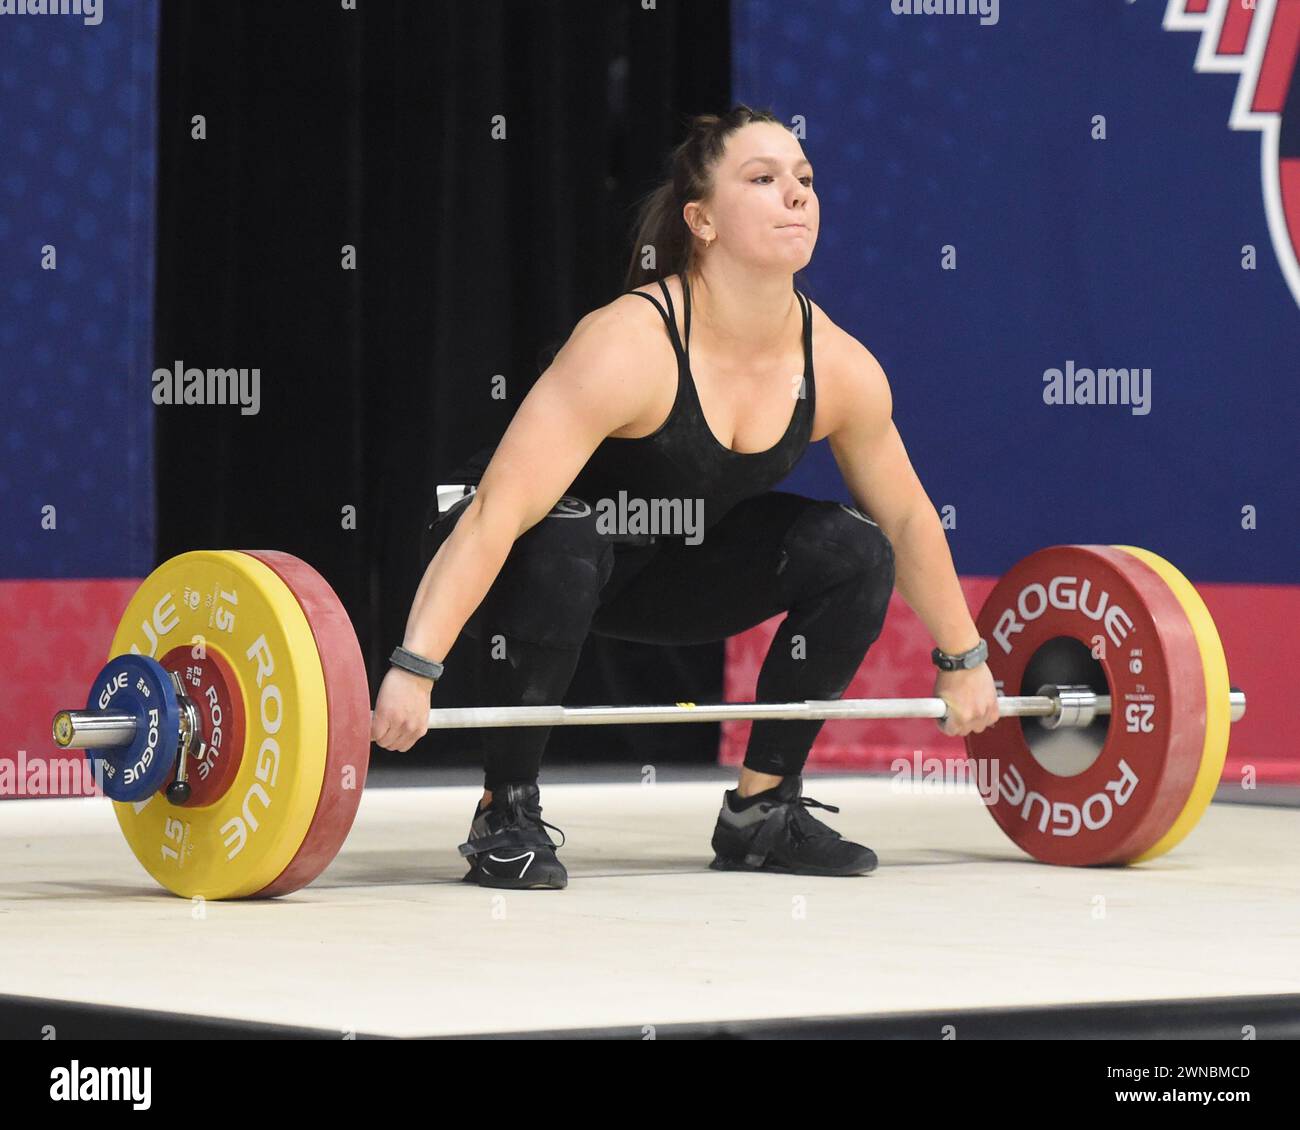 Columbus, Ohio, United States. Mar 1 Feb, 2024. Ella Nicholson lifts 109kgs in the snatch in the Women's Weightlifting Championships at the Arnold Sports Festival in Columbus, Ohio, USA. This lift was a Junior American Record. Credit: Brent Clark/Alamy Live News Stock Photo